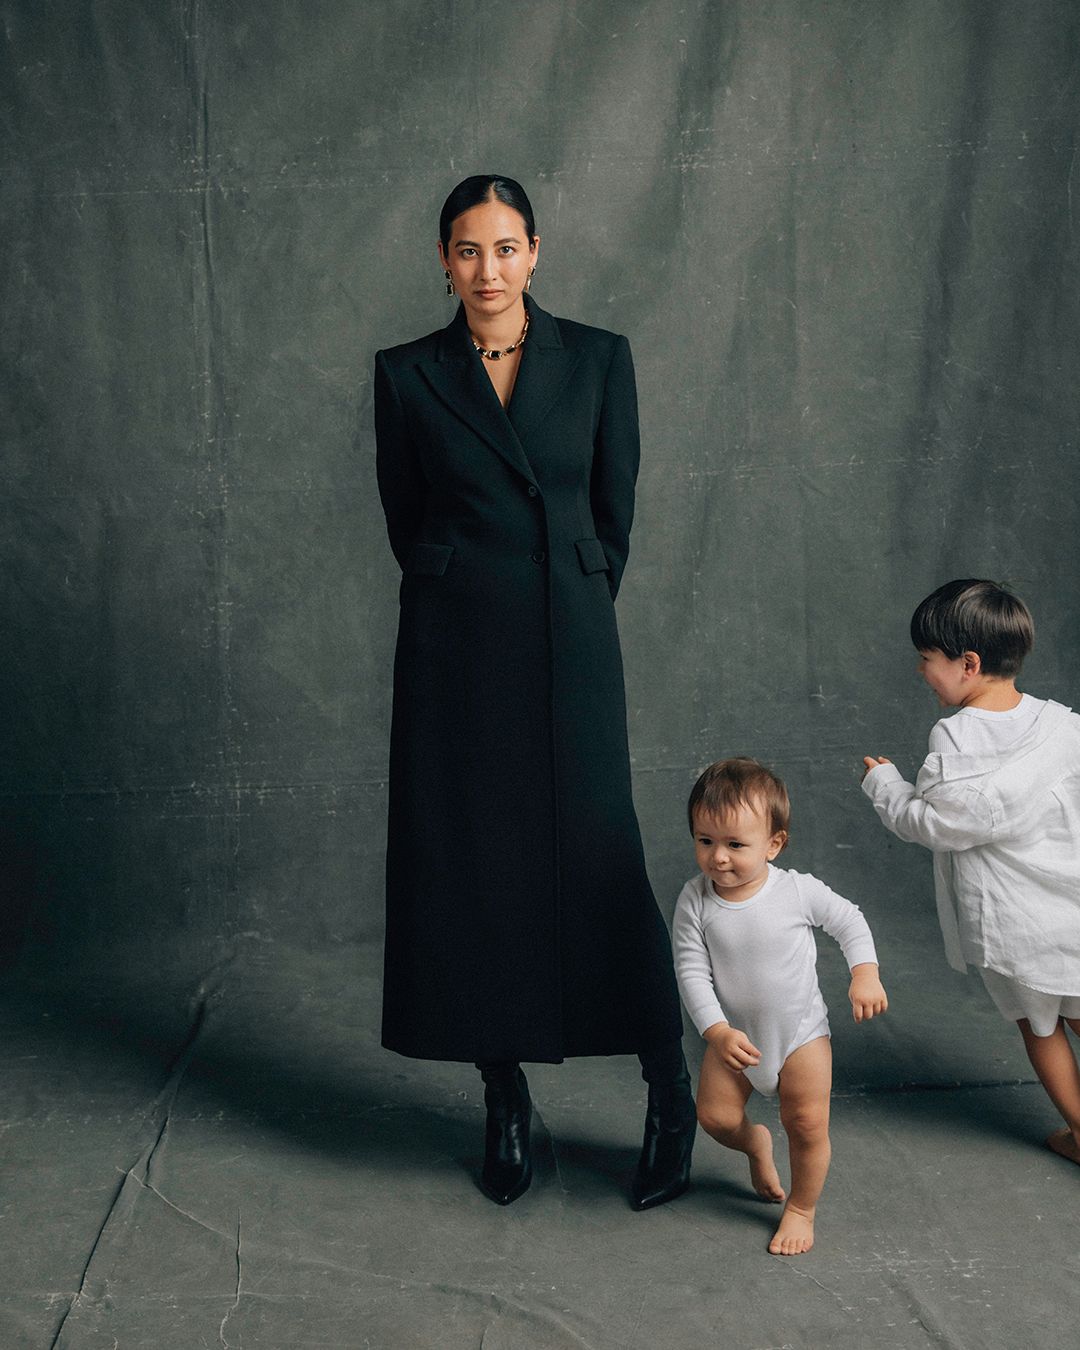 Petta Chua standing in a long black coat with her two sons running around